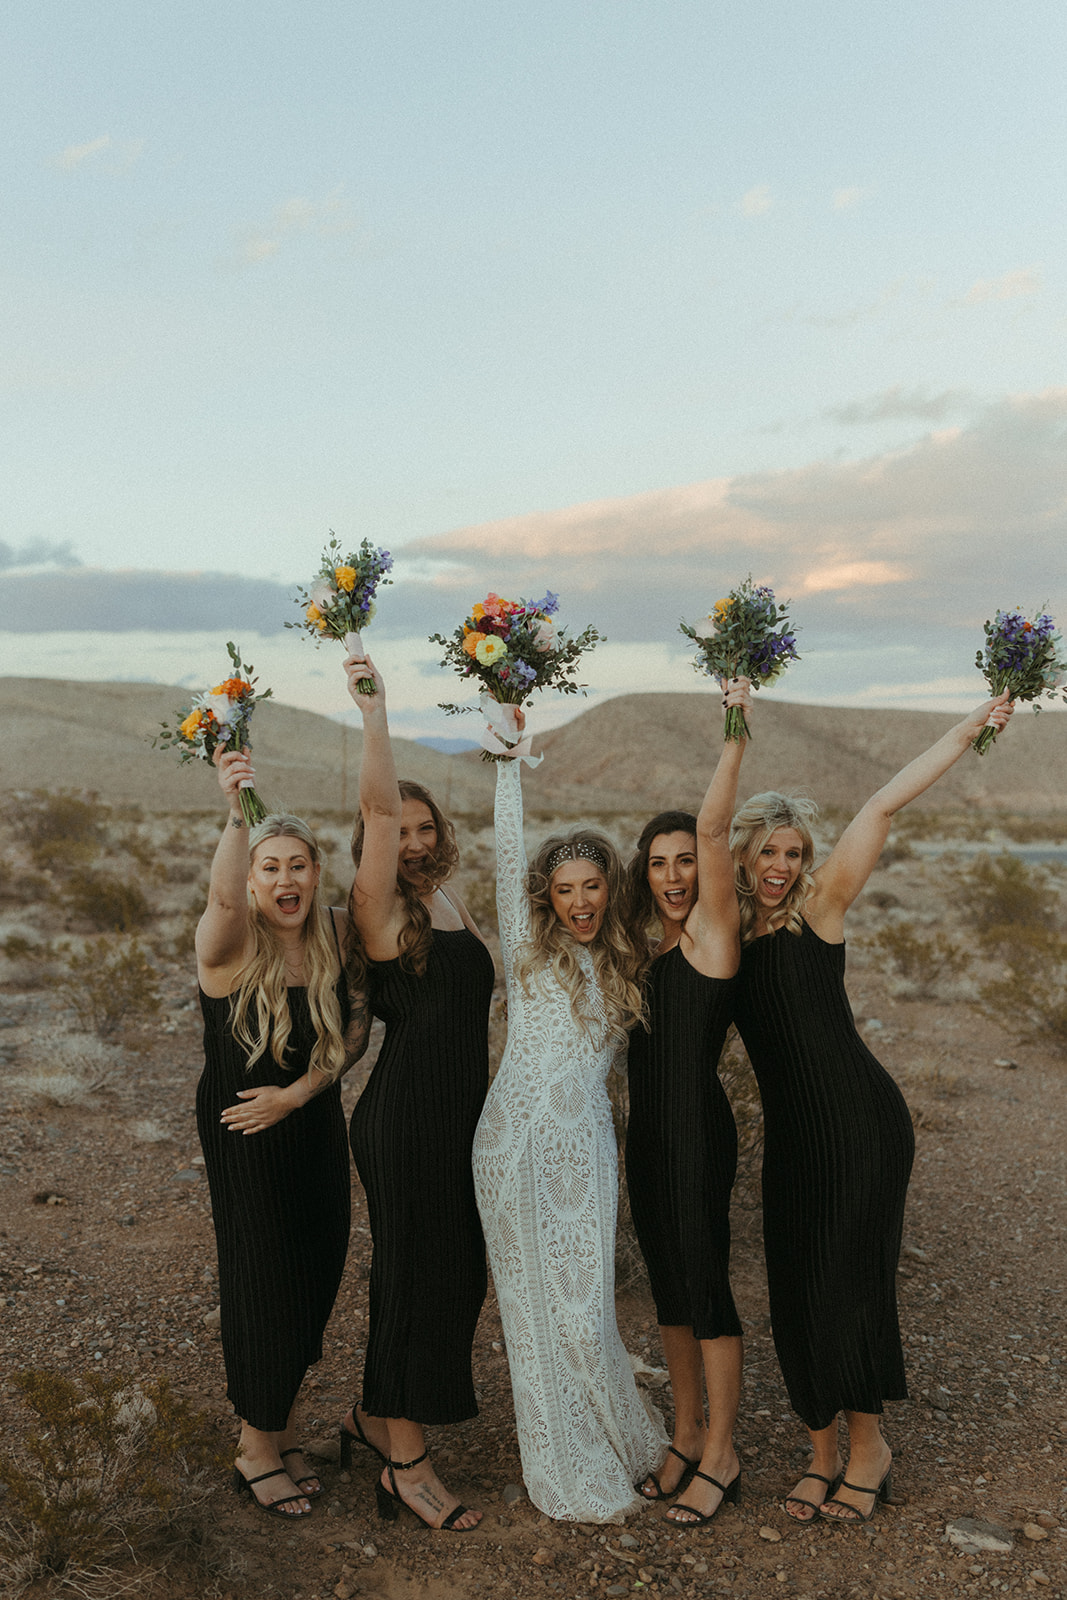 The bride poses with her bridesmaid all throwing their color bouquets in the air